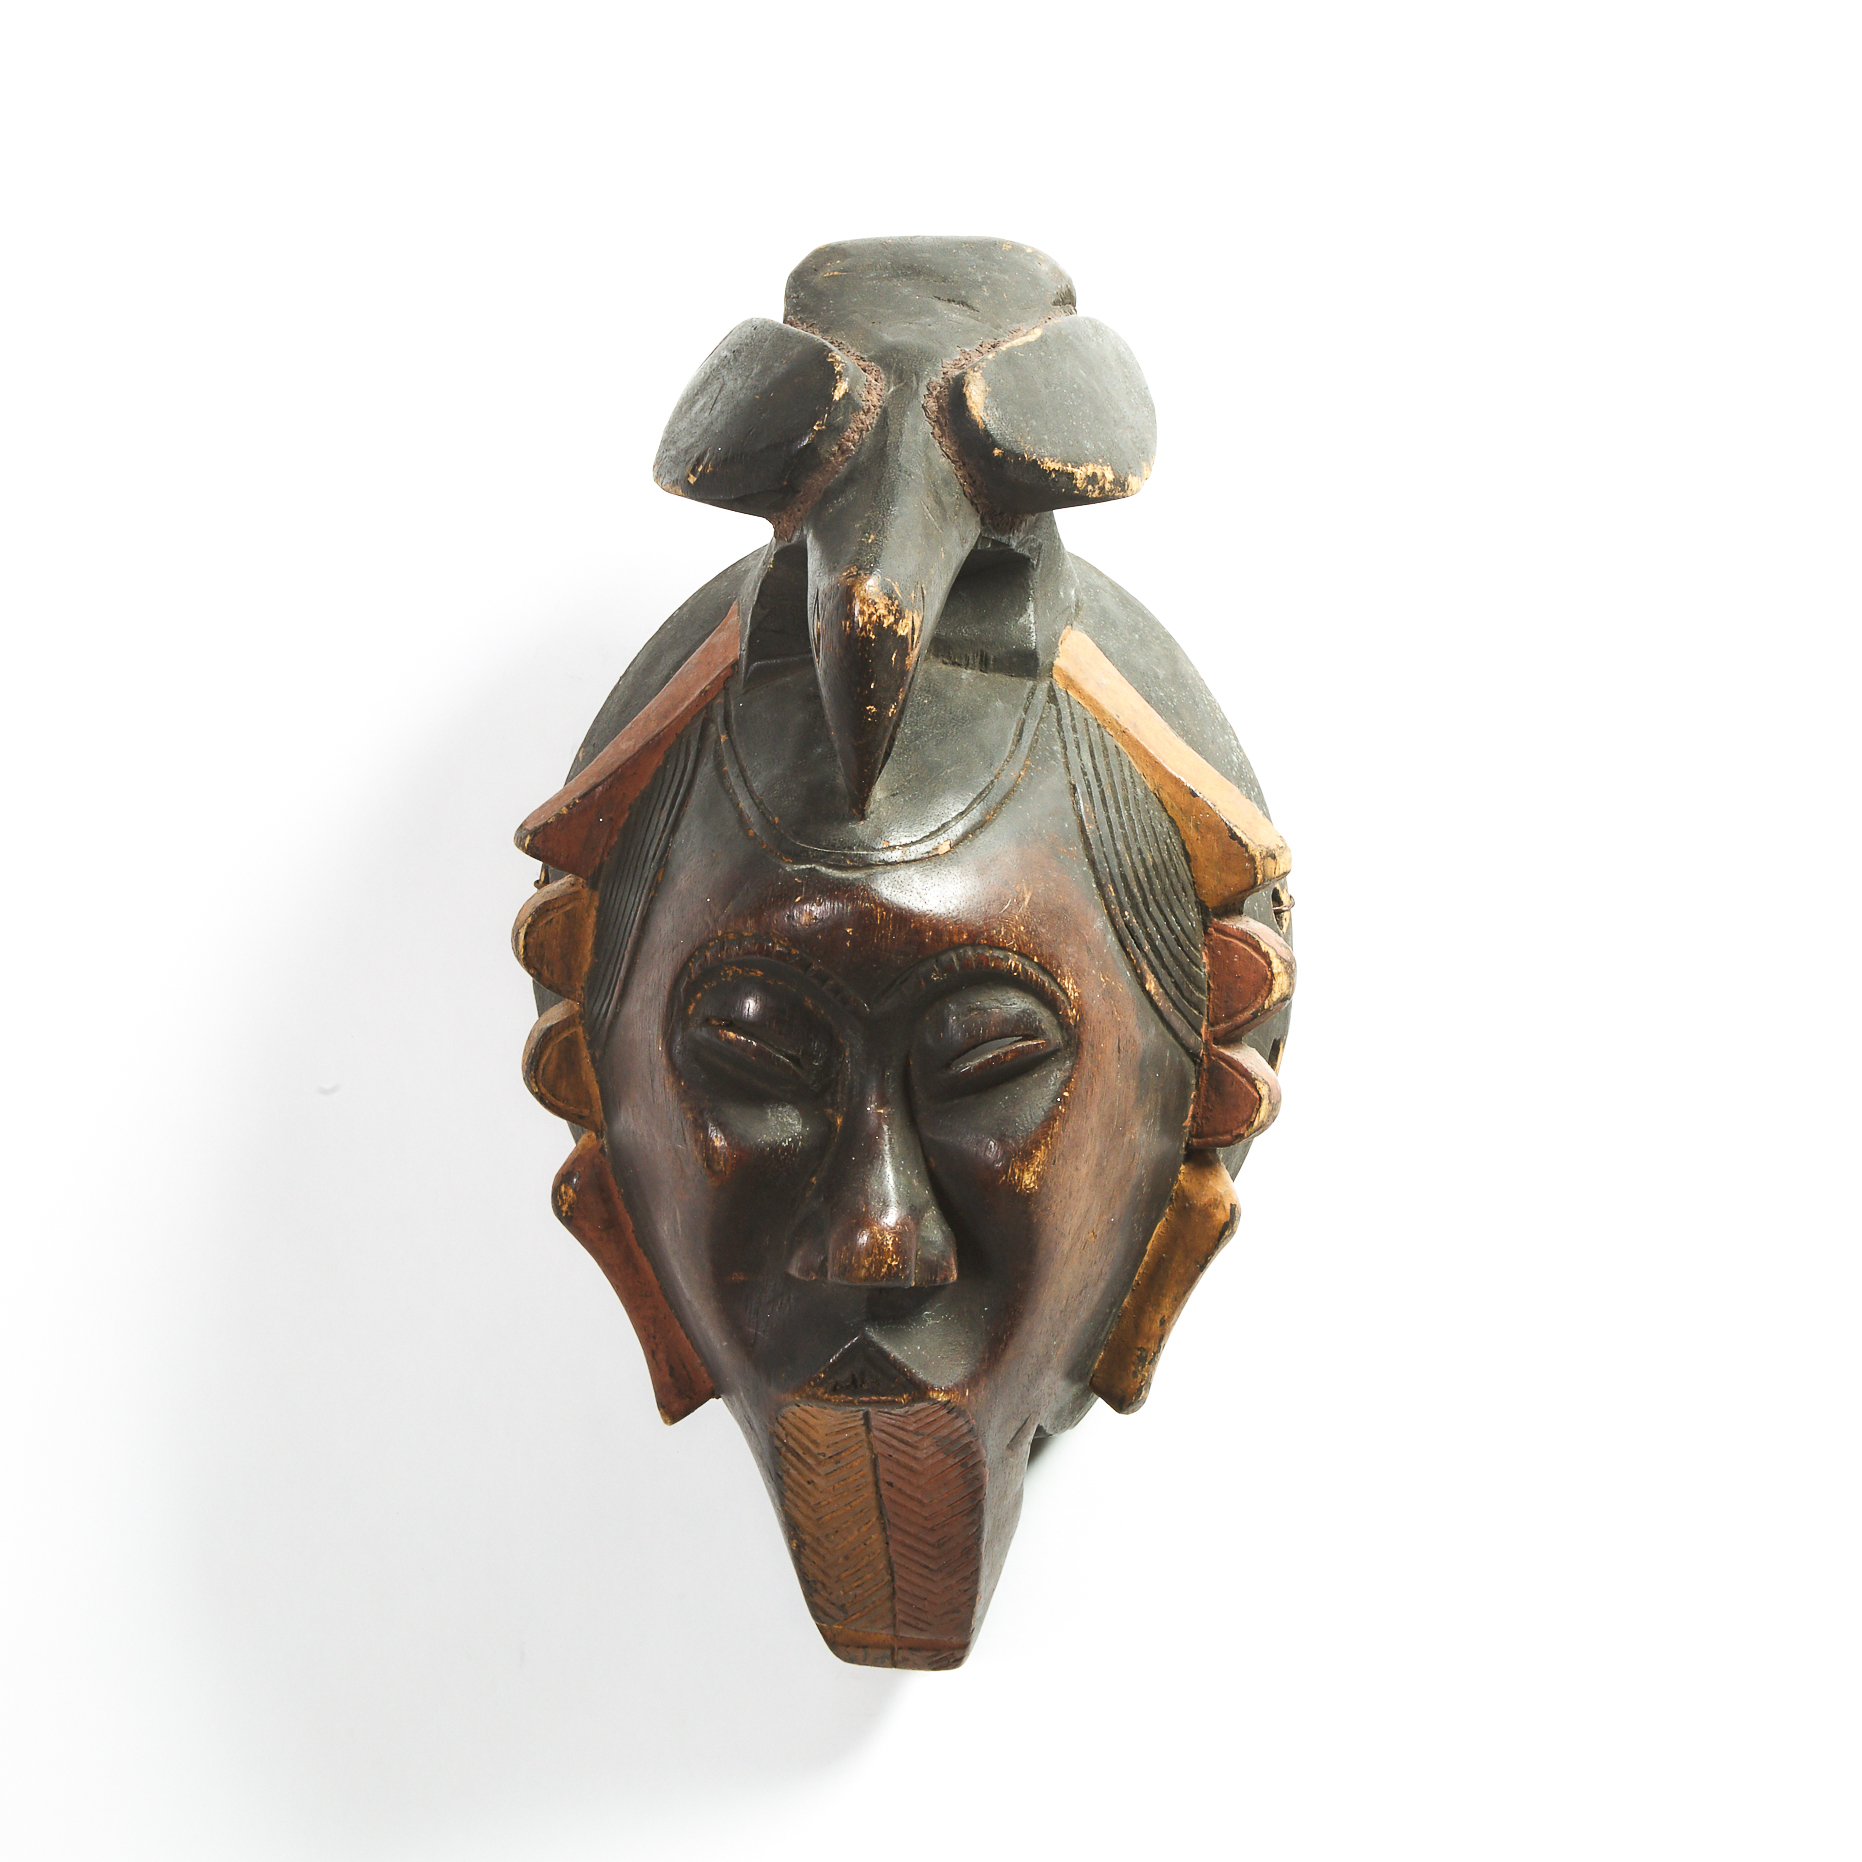 African Mask, possibly Guro or Yaure, mid 20th century